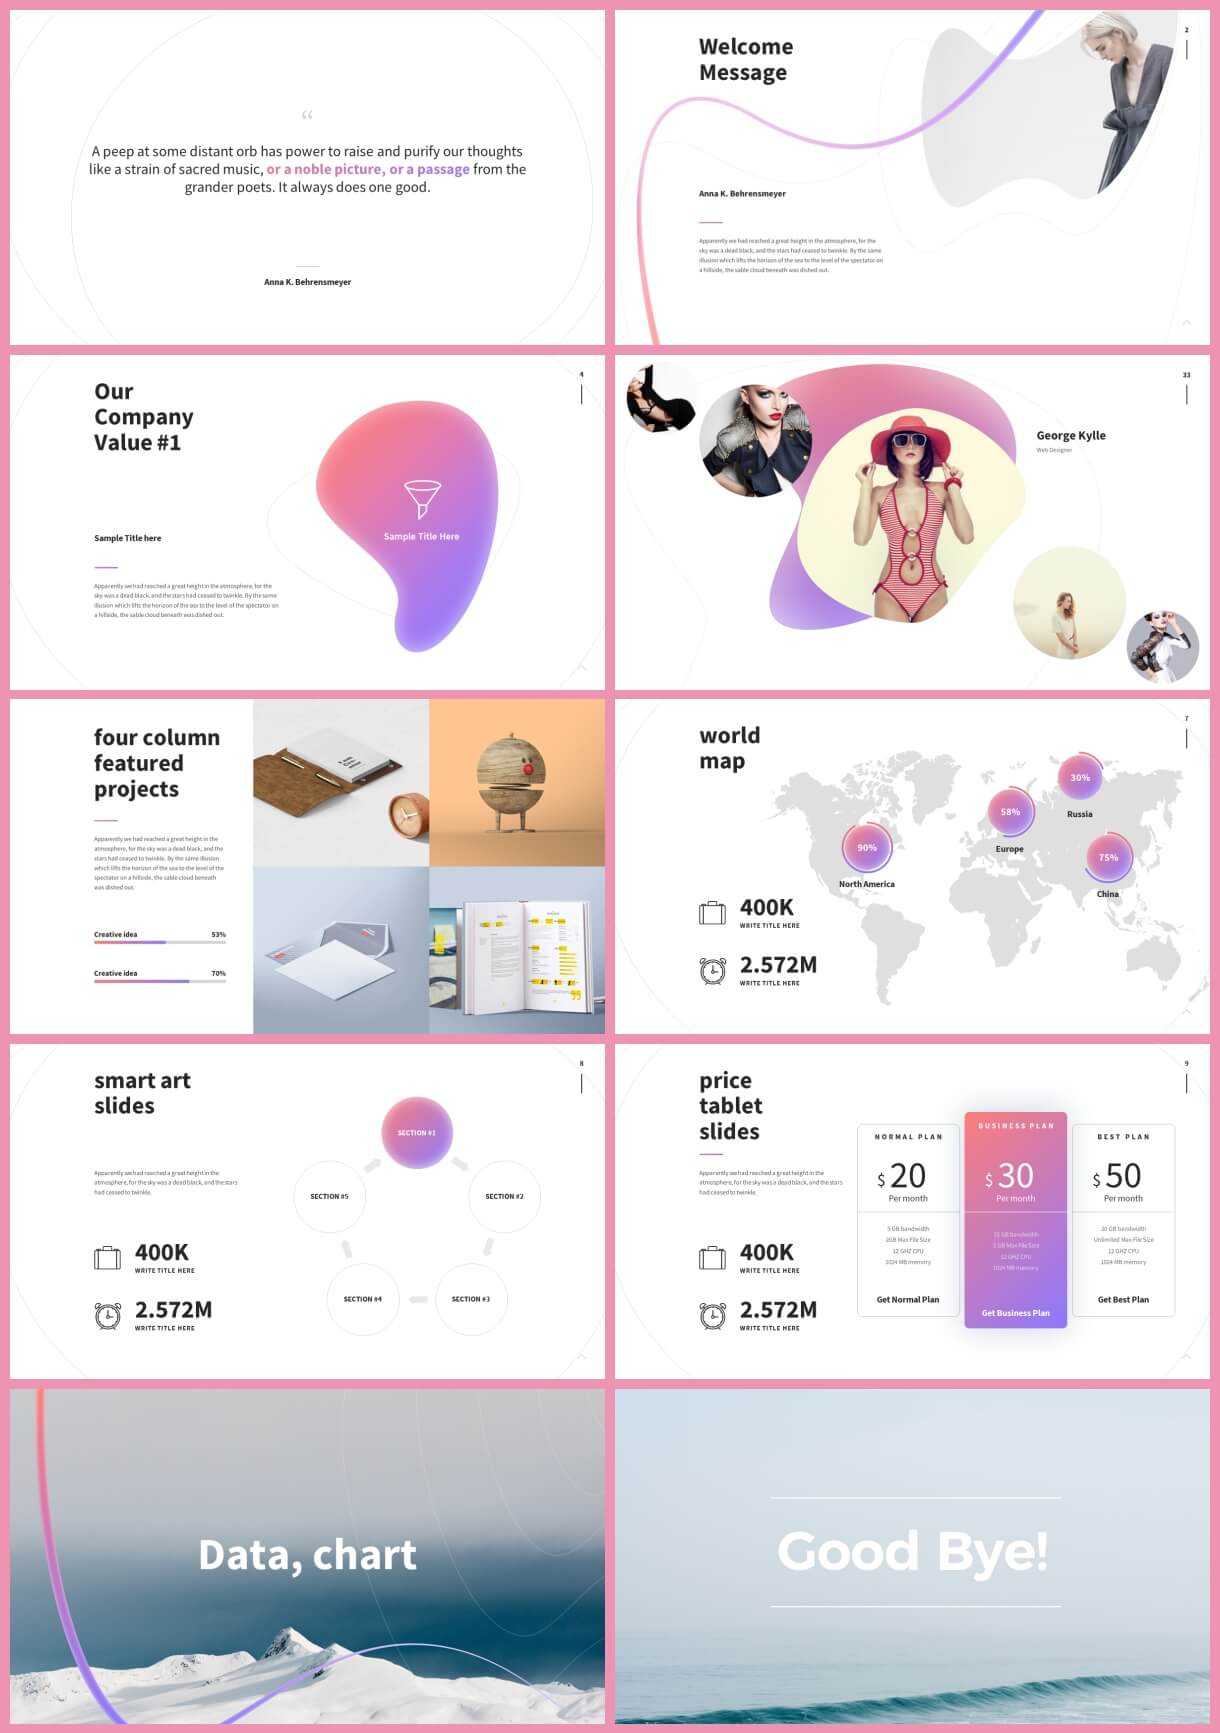 Free Shaper Creative Powerpoint Template (10 Slides) – Just Regarding Price Is Right Powerpoint Template